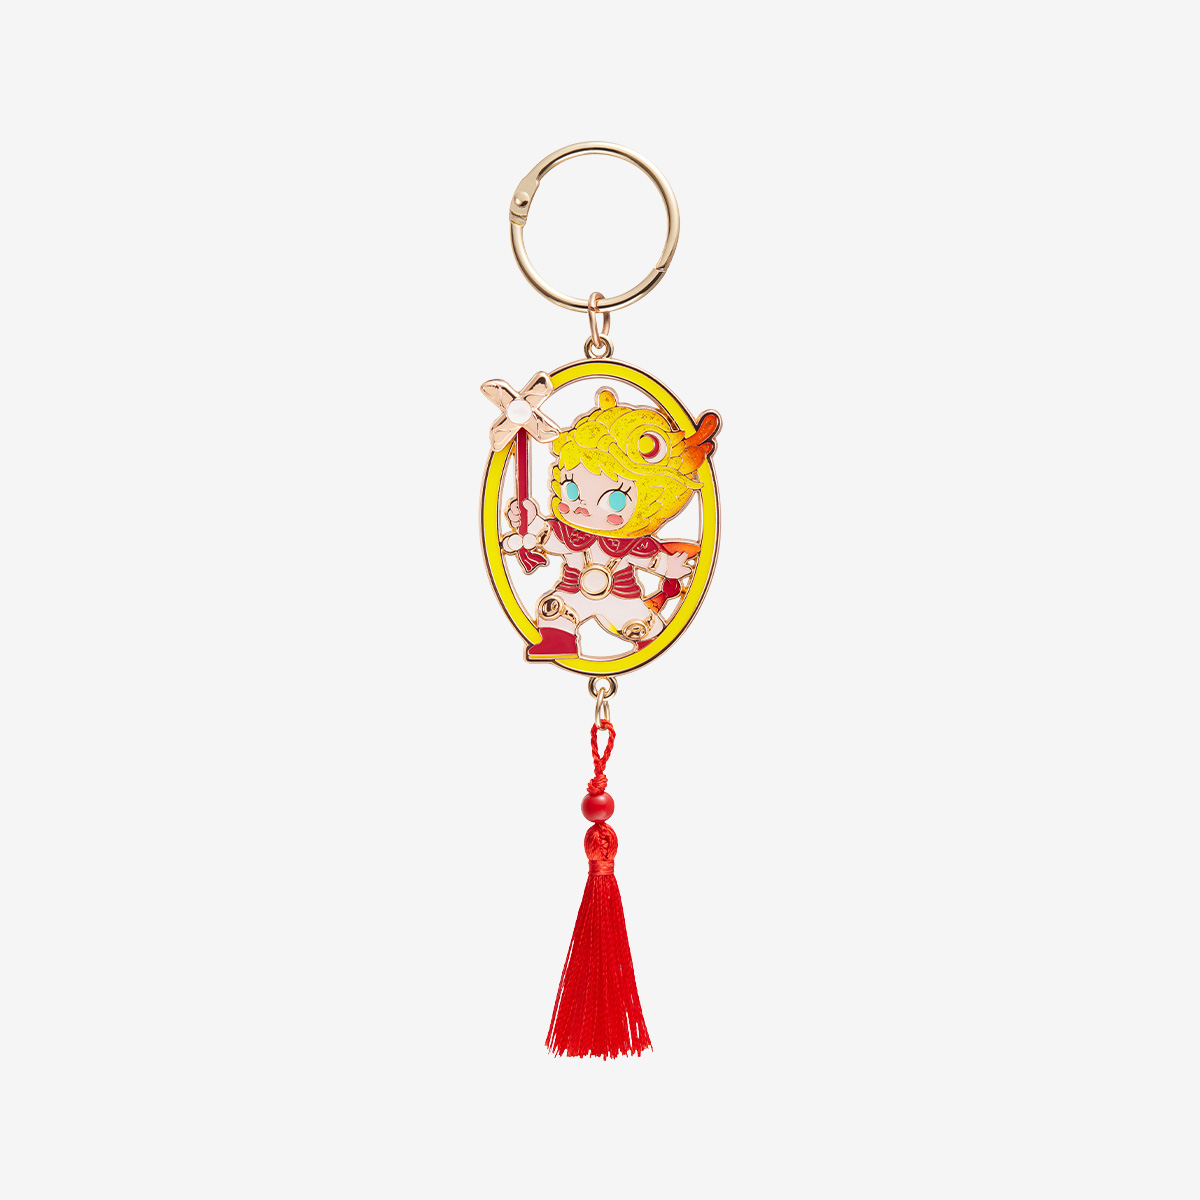 Loong Presents the Treasure Series-Pendant Blind Box | Accessories ...